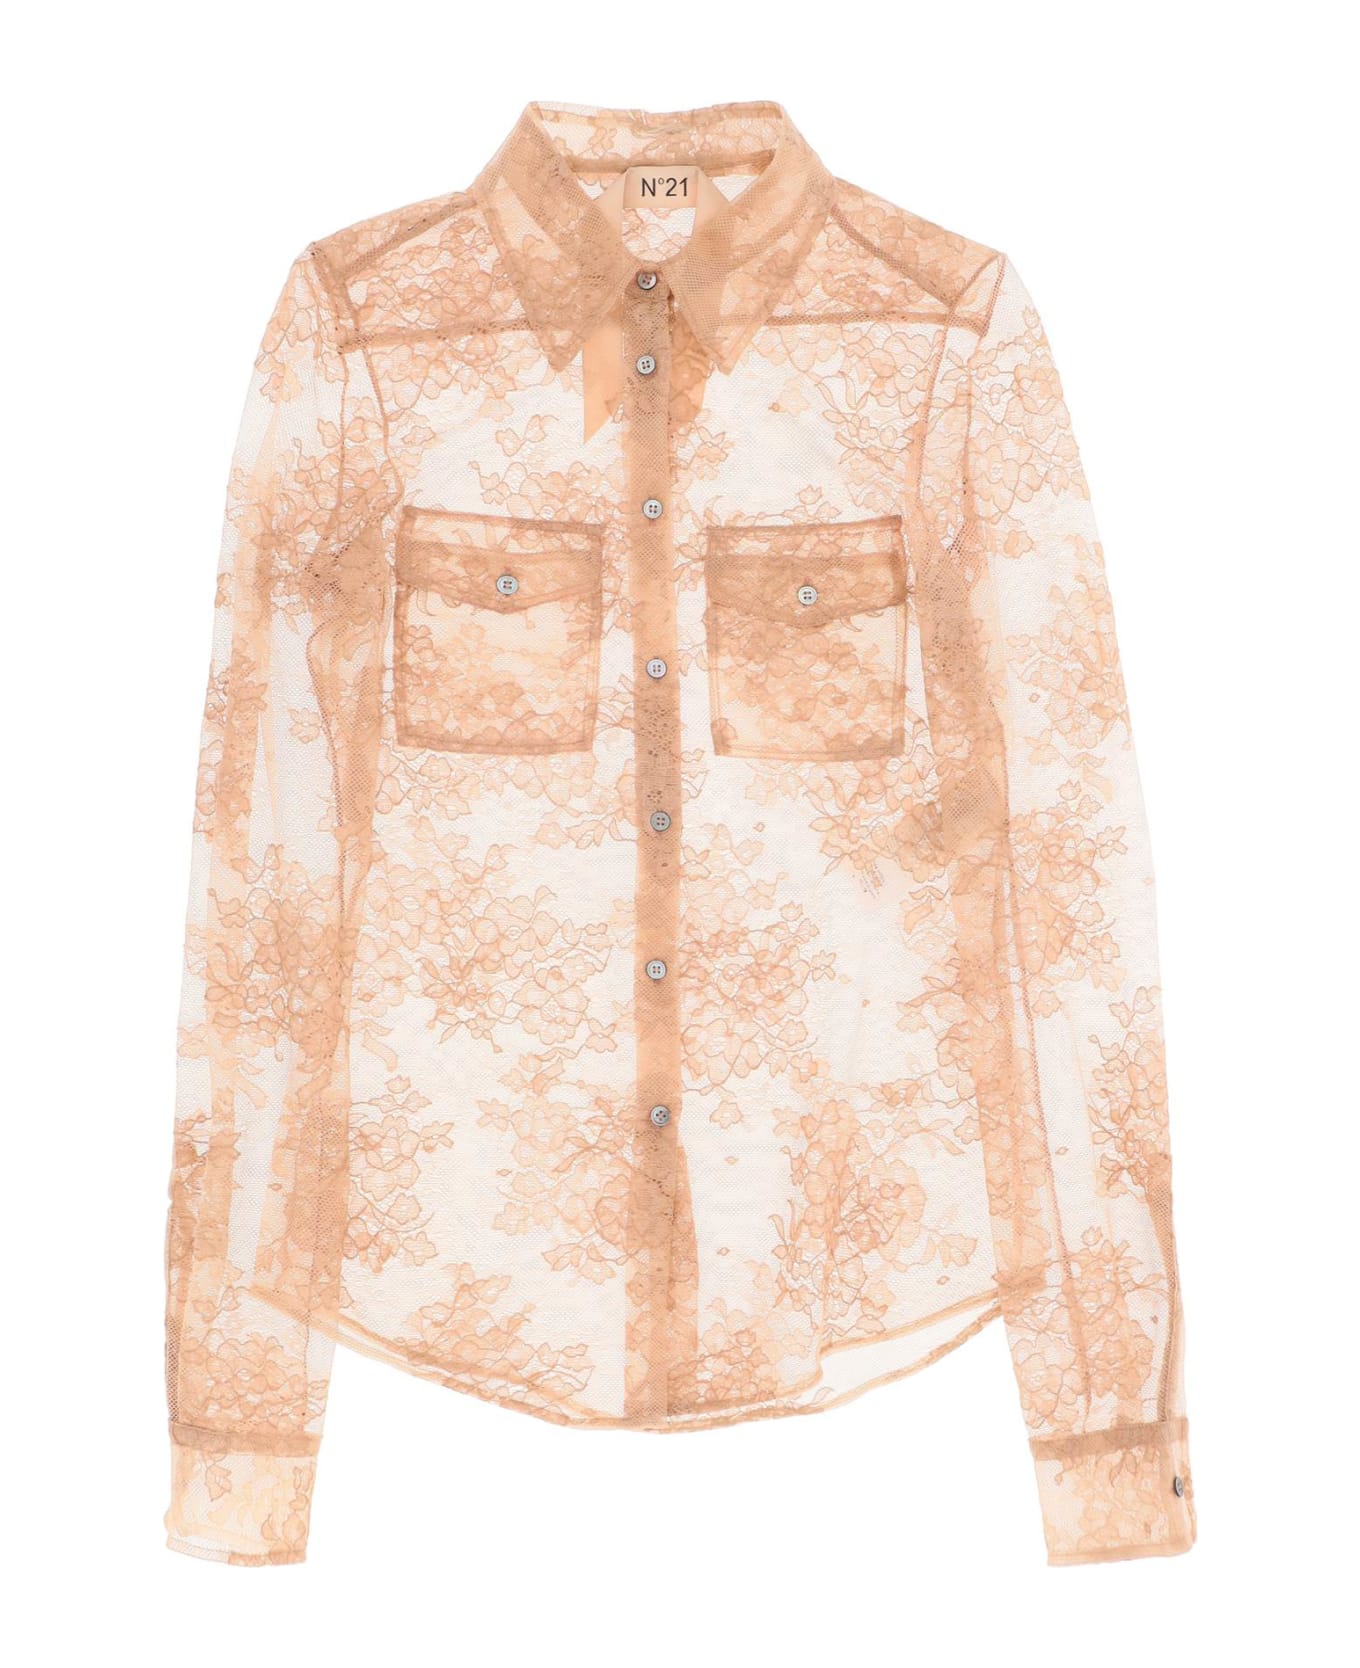 N.21 Lace Shirt - CEROTTO (Pink)